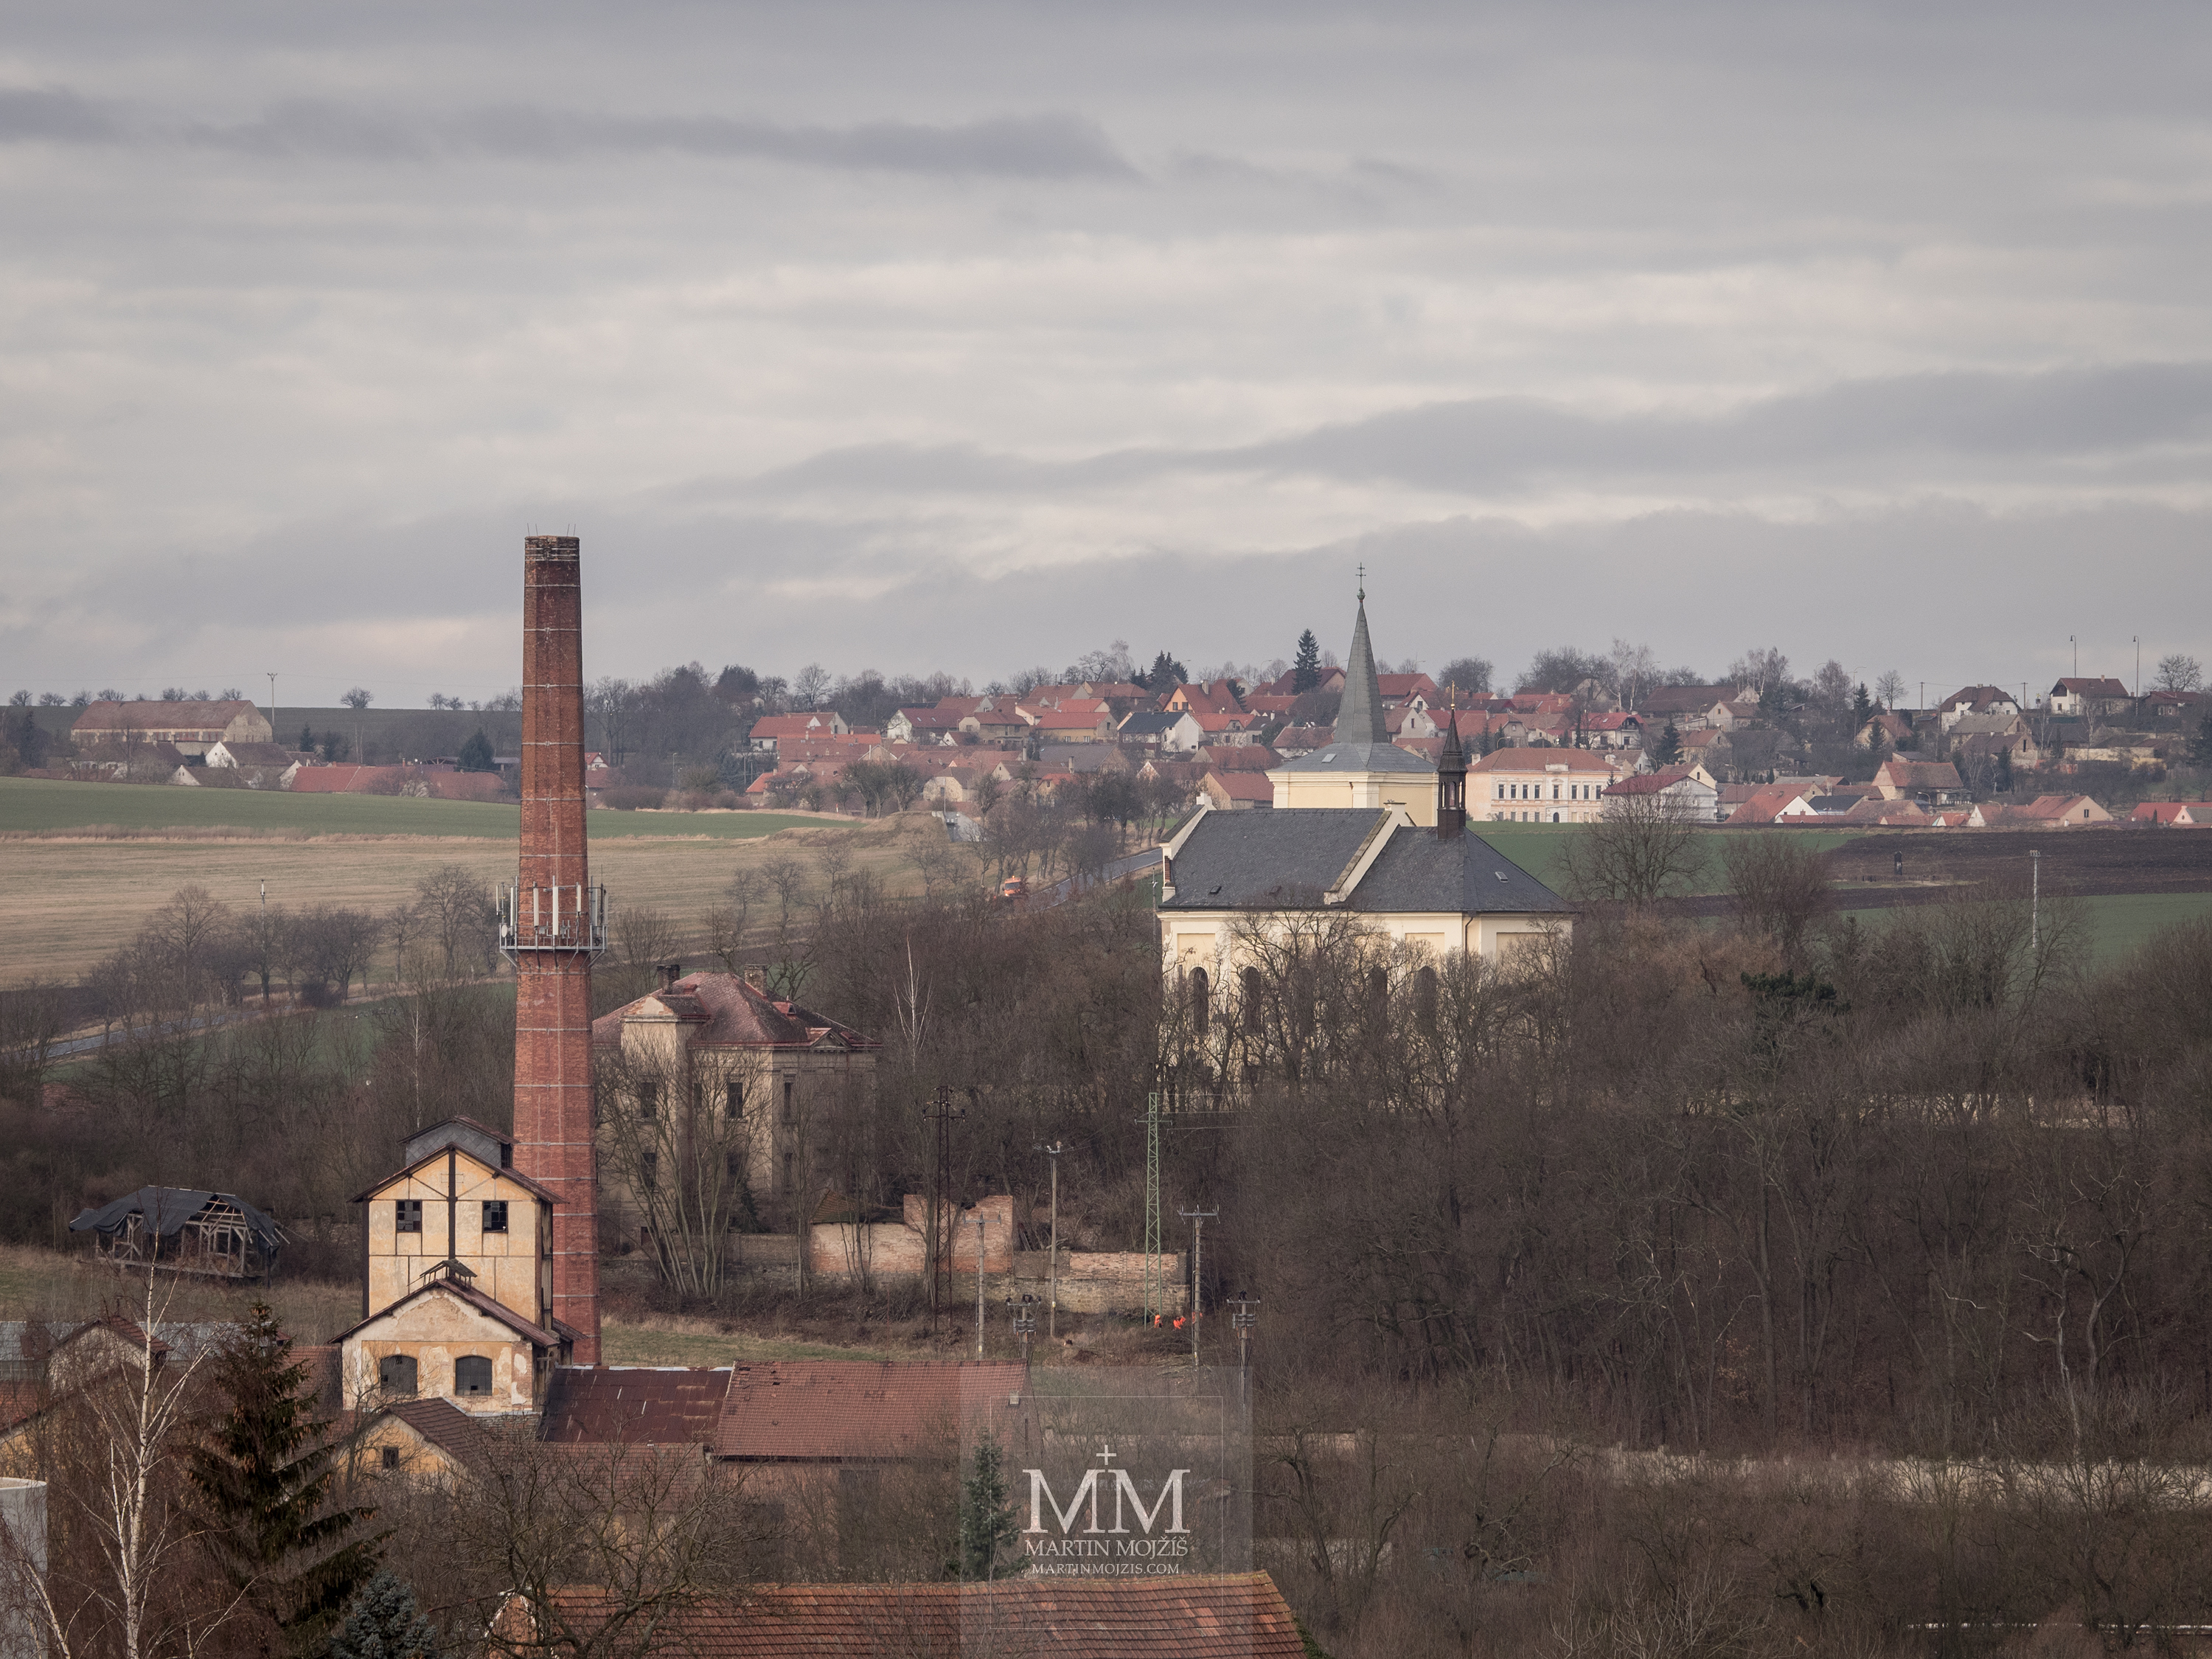 Landscape, factory and church in foreground. Photograph created with the Olympus M. Zuiko digital ED 40 - 150 mm 1:2.8 PRO.